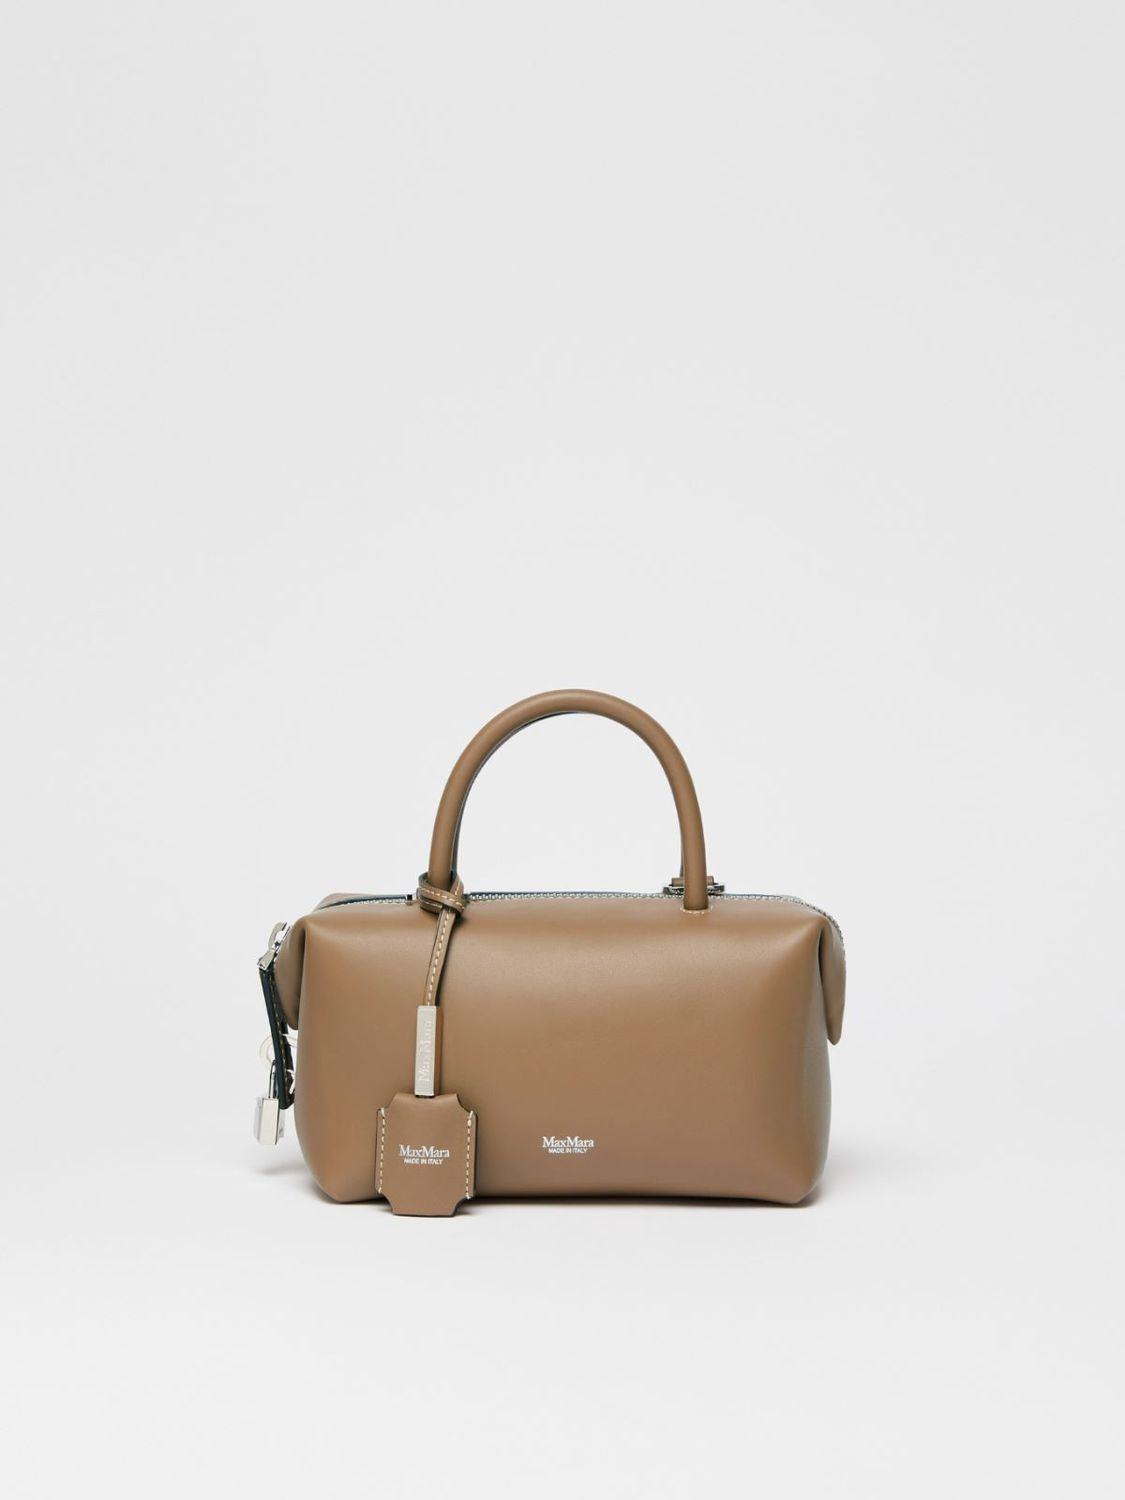 Luxury Tan Leather Handbag for Women - FW24 Collection by Max Mara